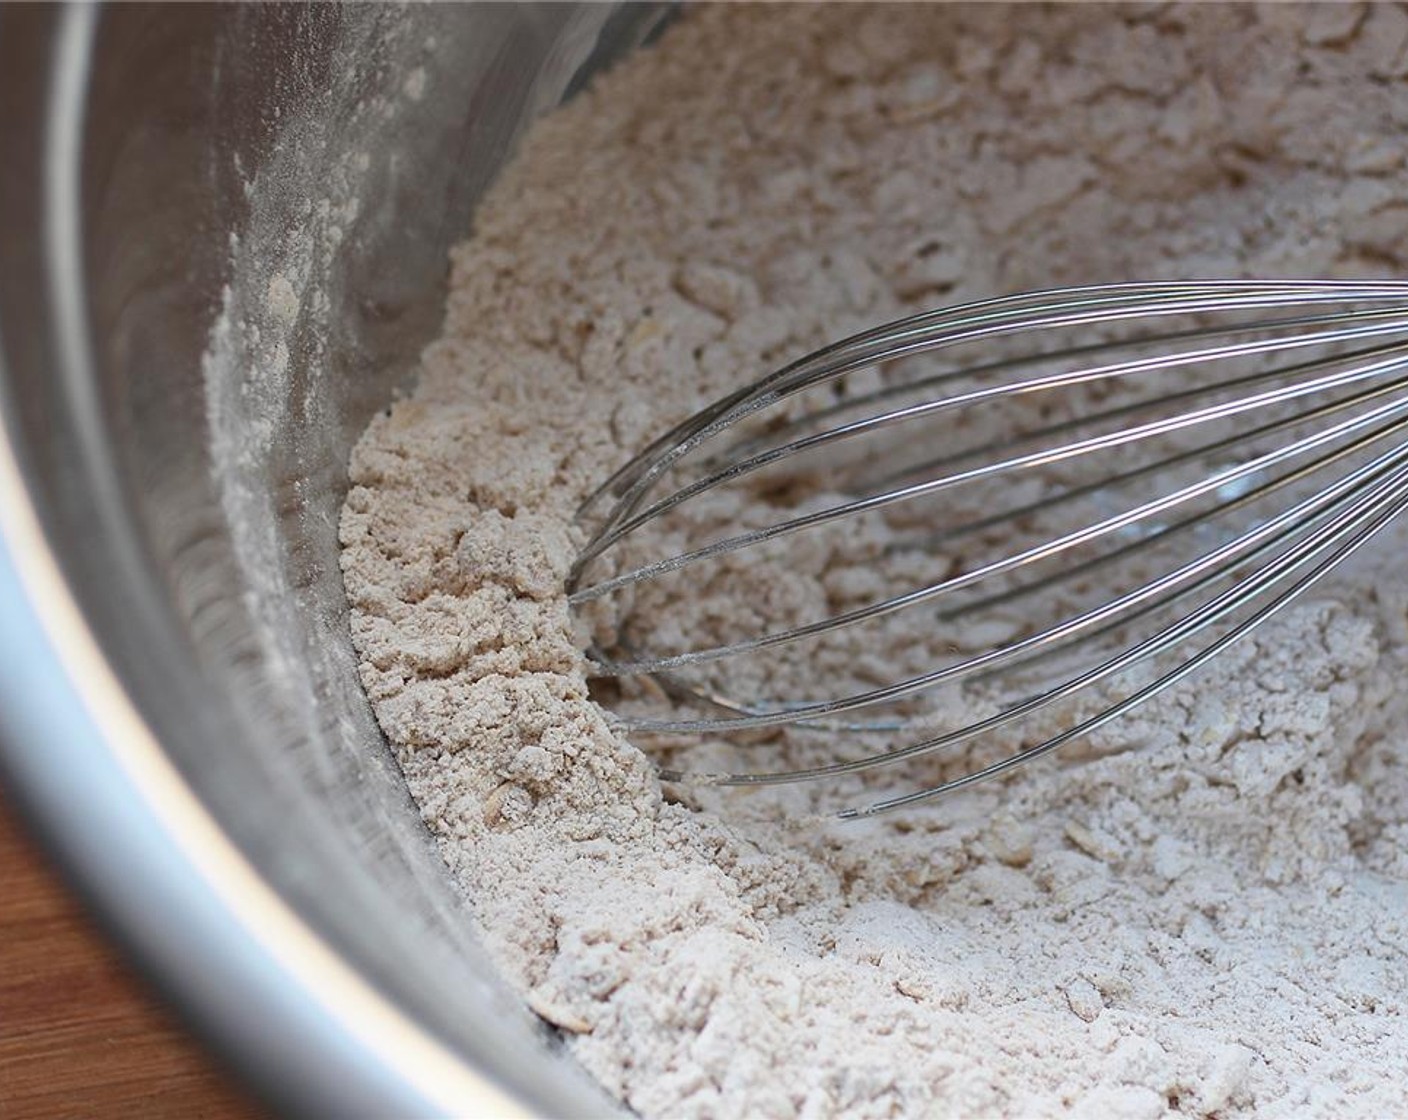 step 2 In one bowl, mix the dry ingredients: Whole Wheat Pastry Flour (1 cup), Old Fashioned Rolled Oats (1/2 cup), Baking Powder (1 tsp) and Ground Cinnamon (1 tsp).